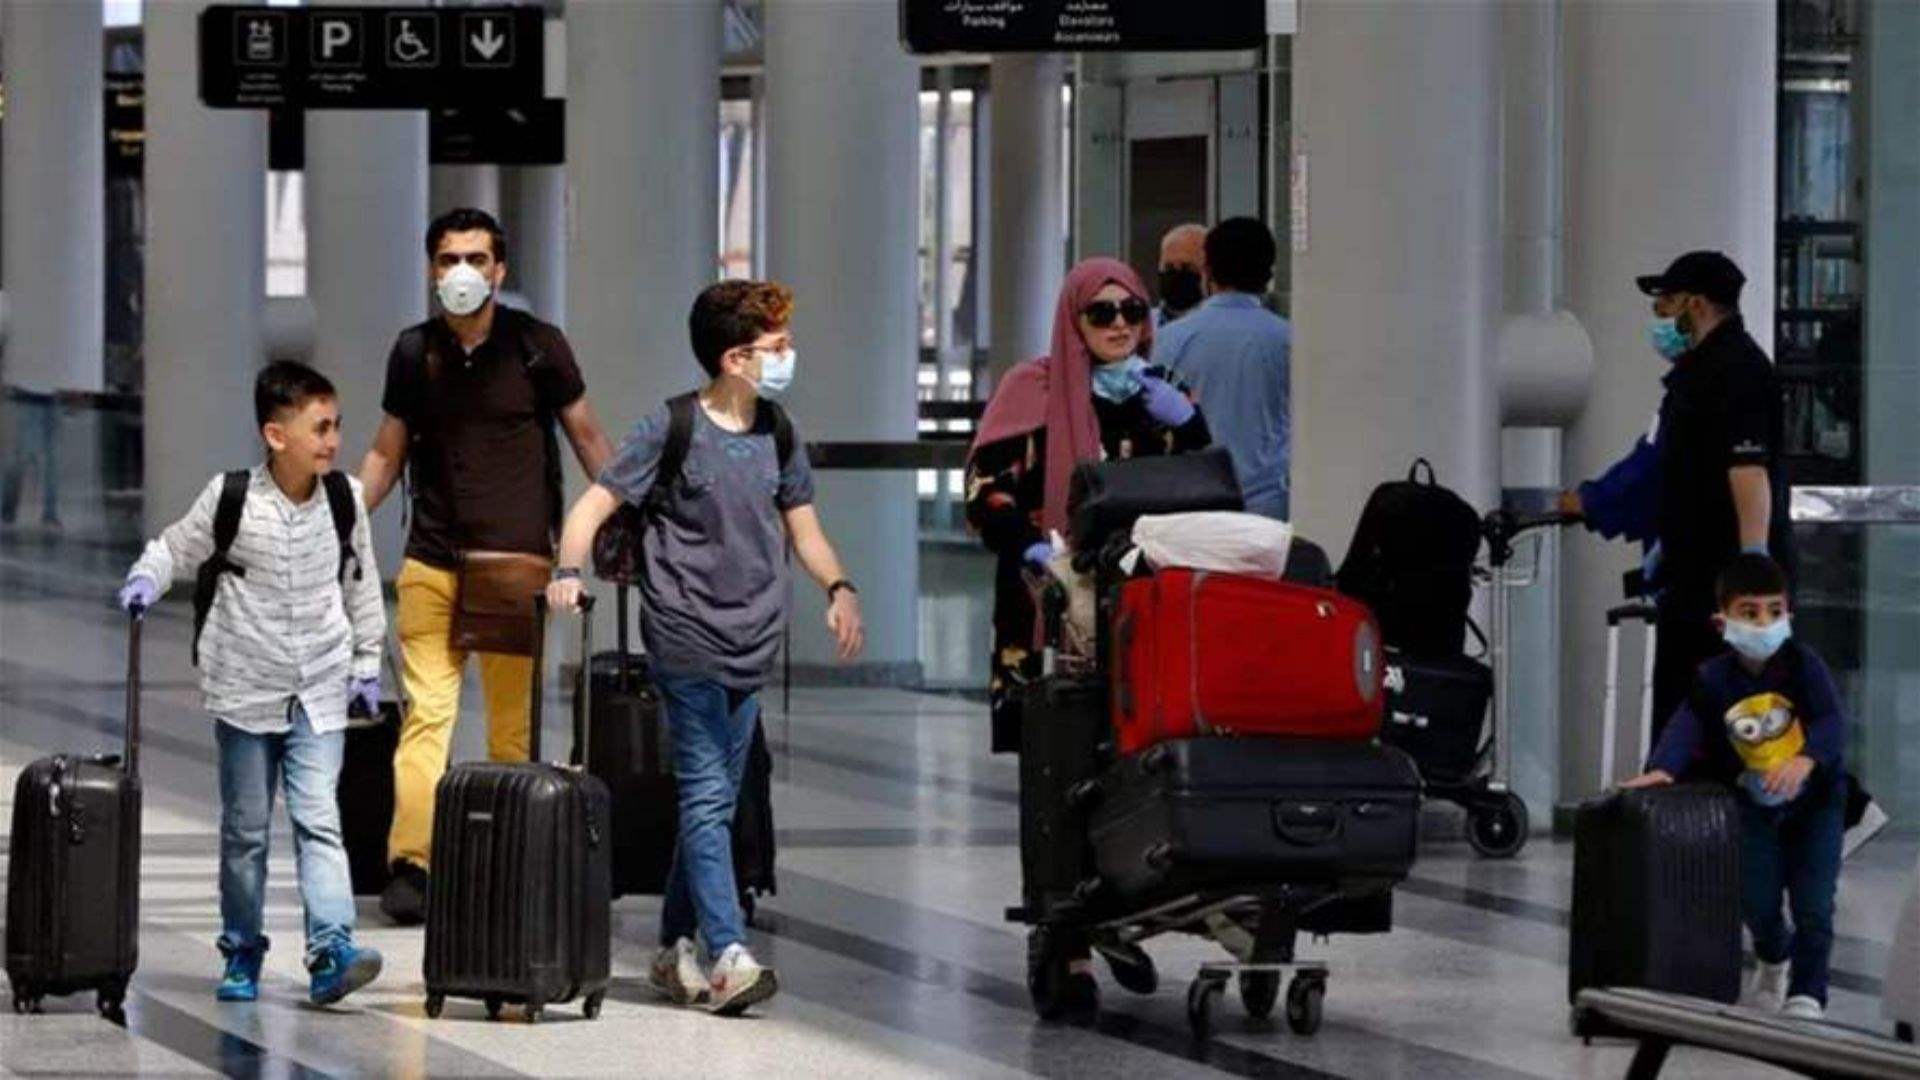 Beirut Airport issues statement regarding missing items 